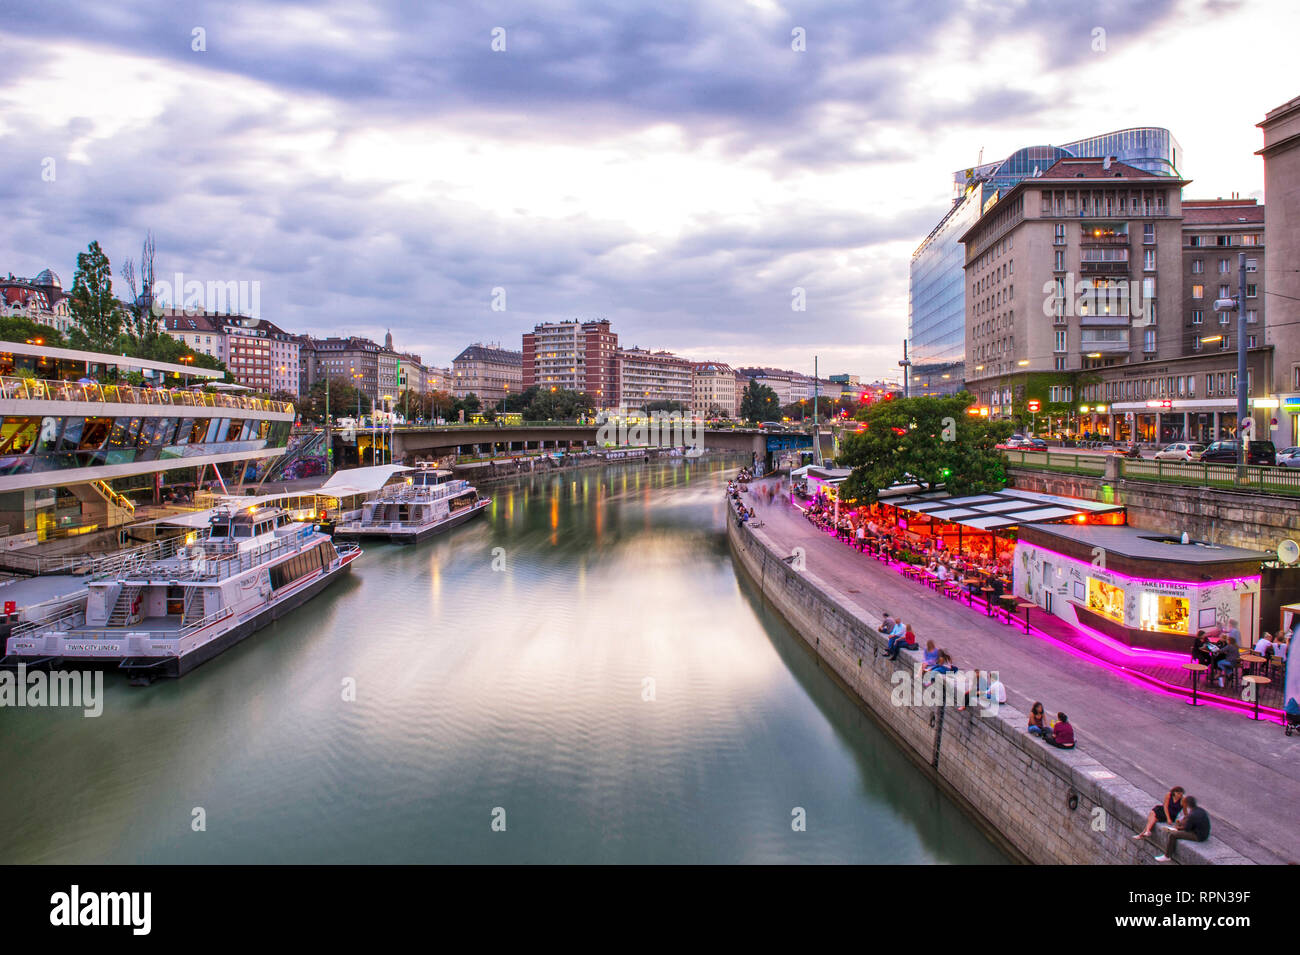 Riverboats and cafes along the Danube canal (Donaukanal) at sunset, close to Schwedenplatz, Vienna, Austria Stock Photo